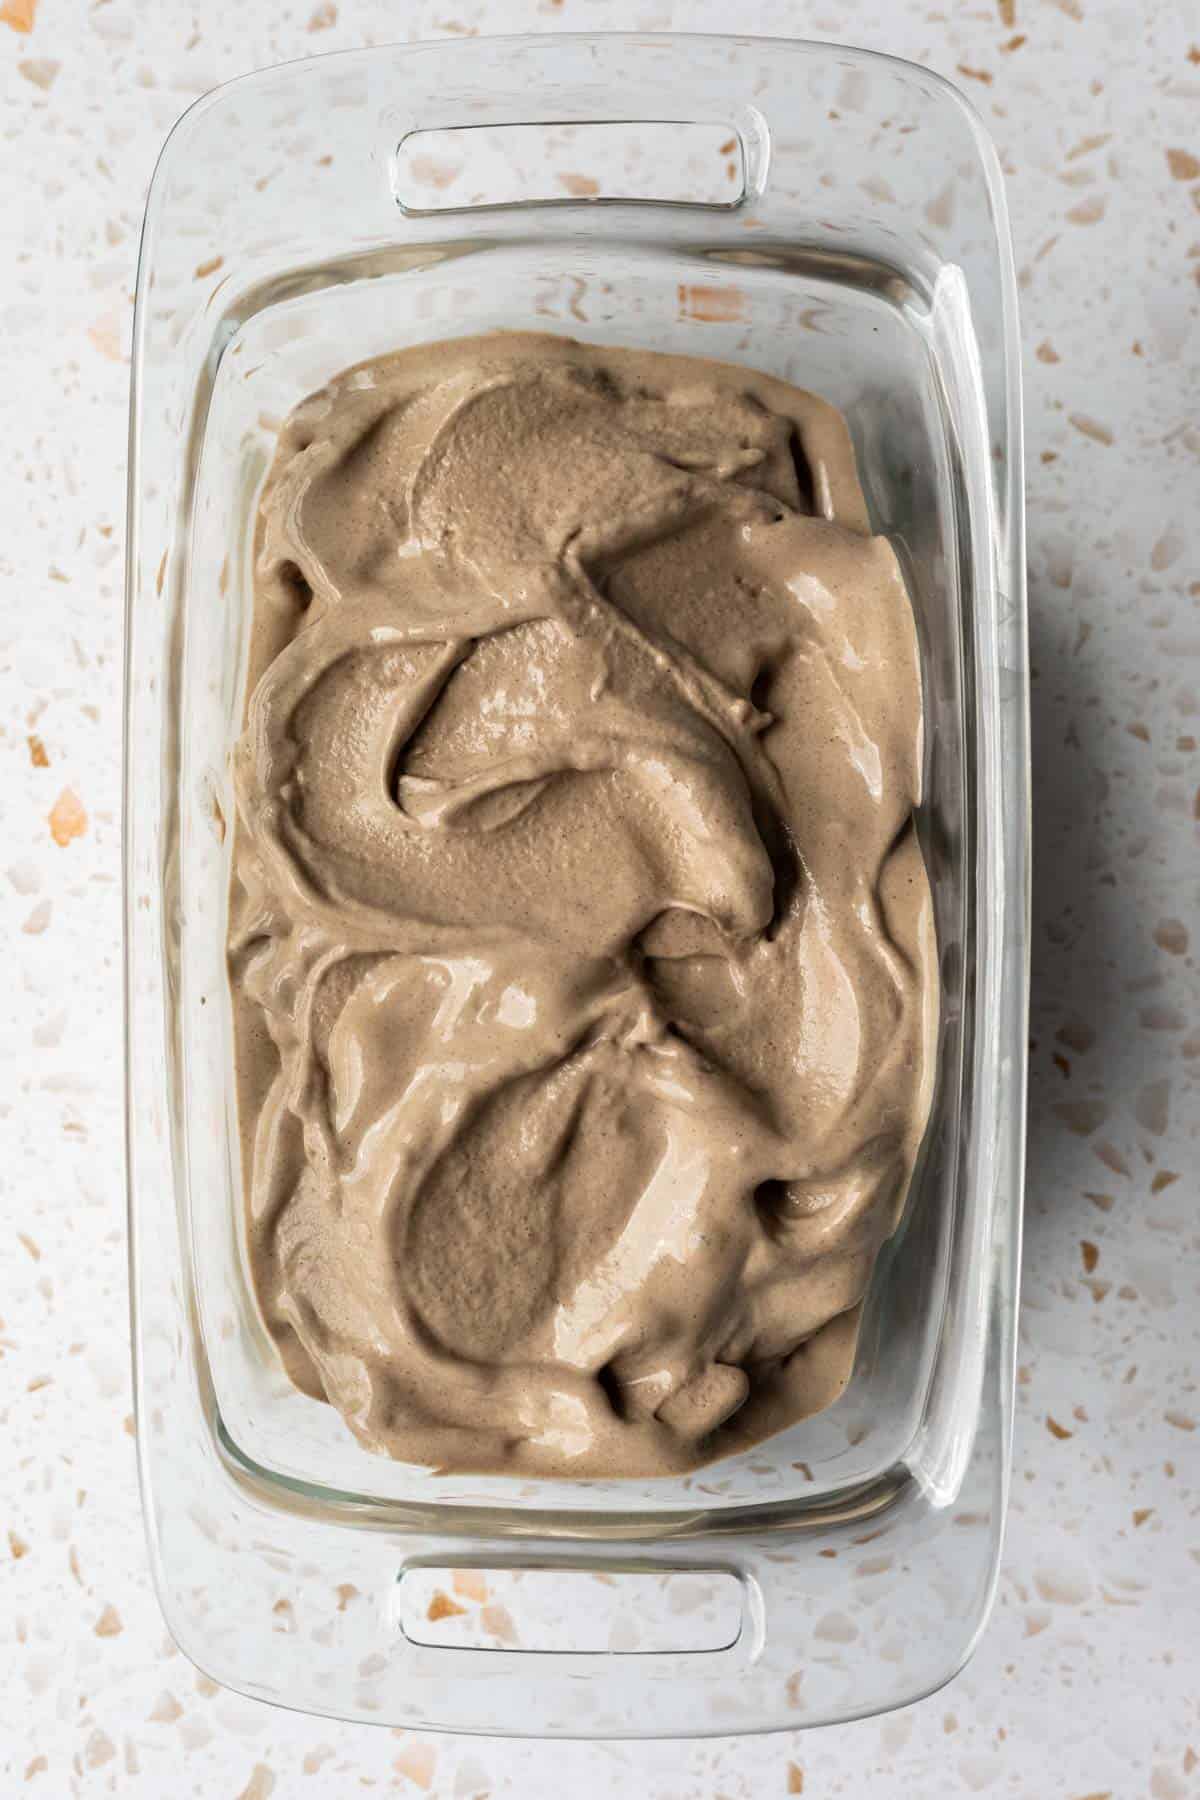 Soft serve date ice cream spread in a container ready to go in the freezer.